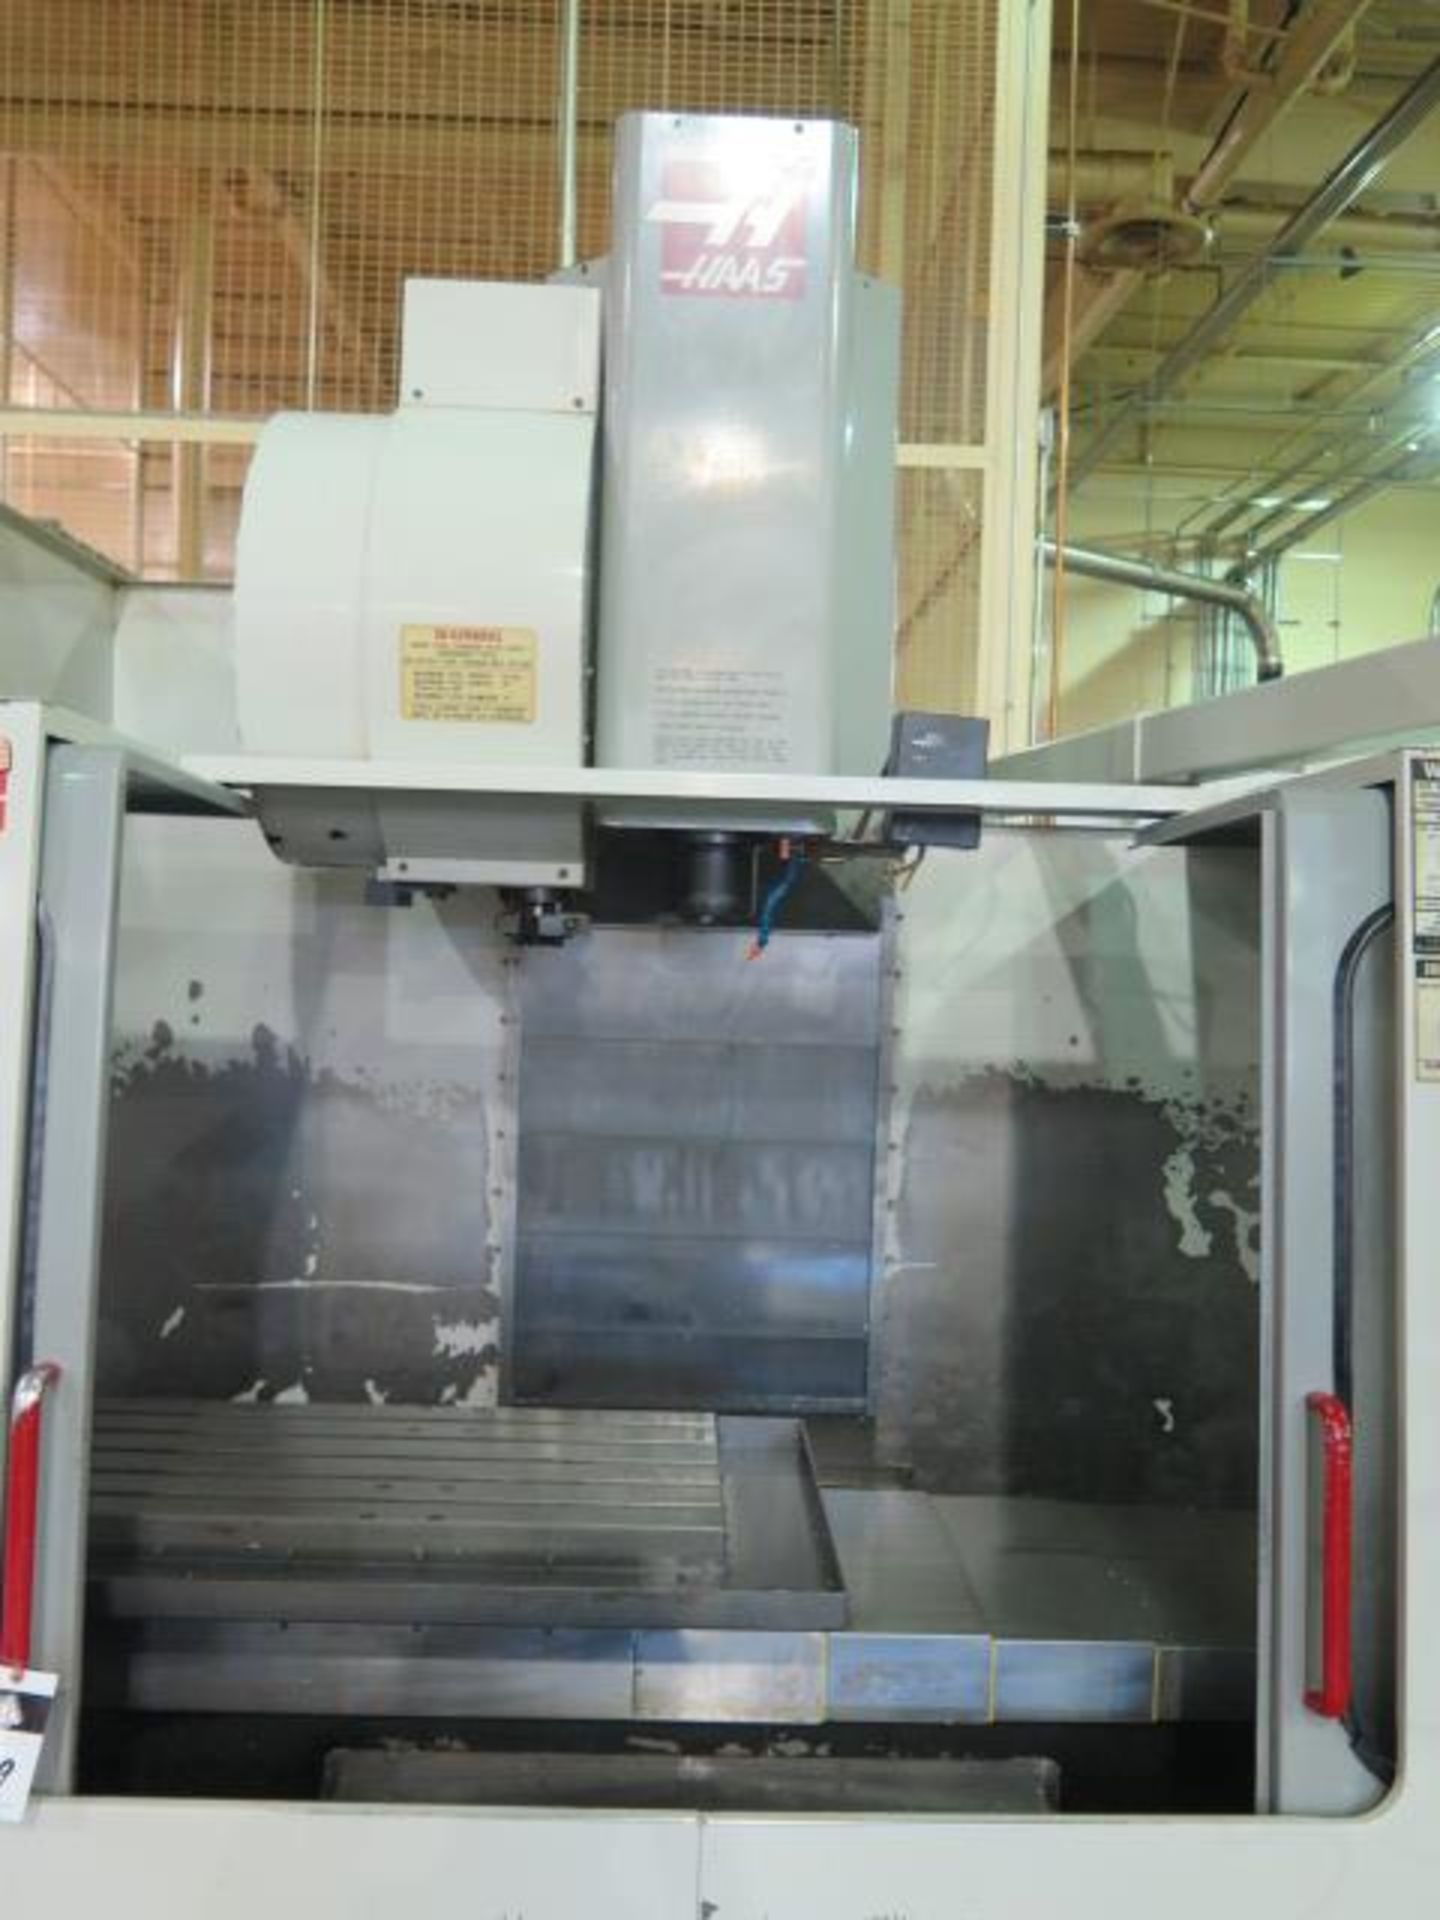 1999 Haas VF-4 CNC VMC s/n 18376 w/ Haas Controls, 24-Station Side Mount,Cat 40, SOLD AS IS - Image 4 of 14